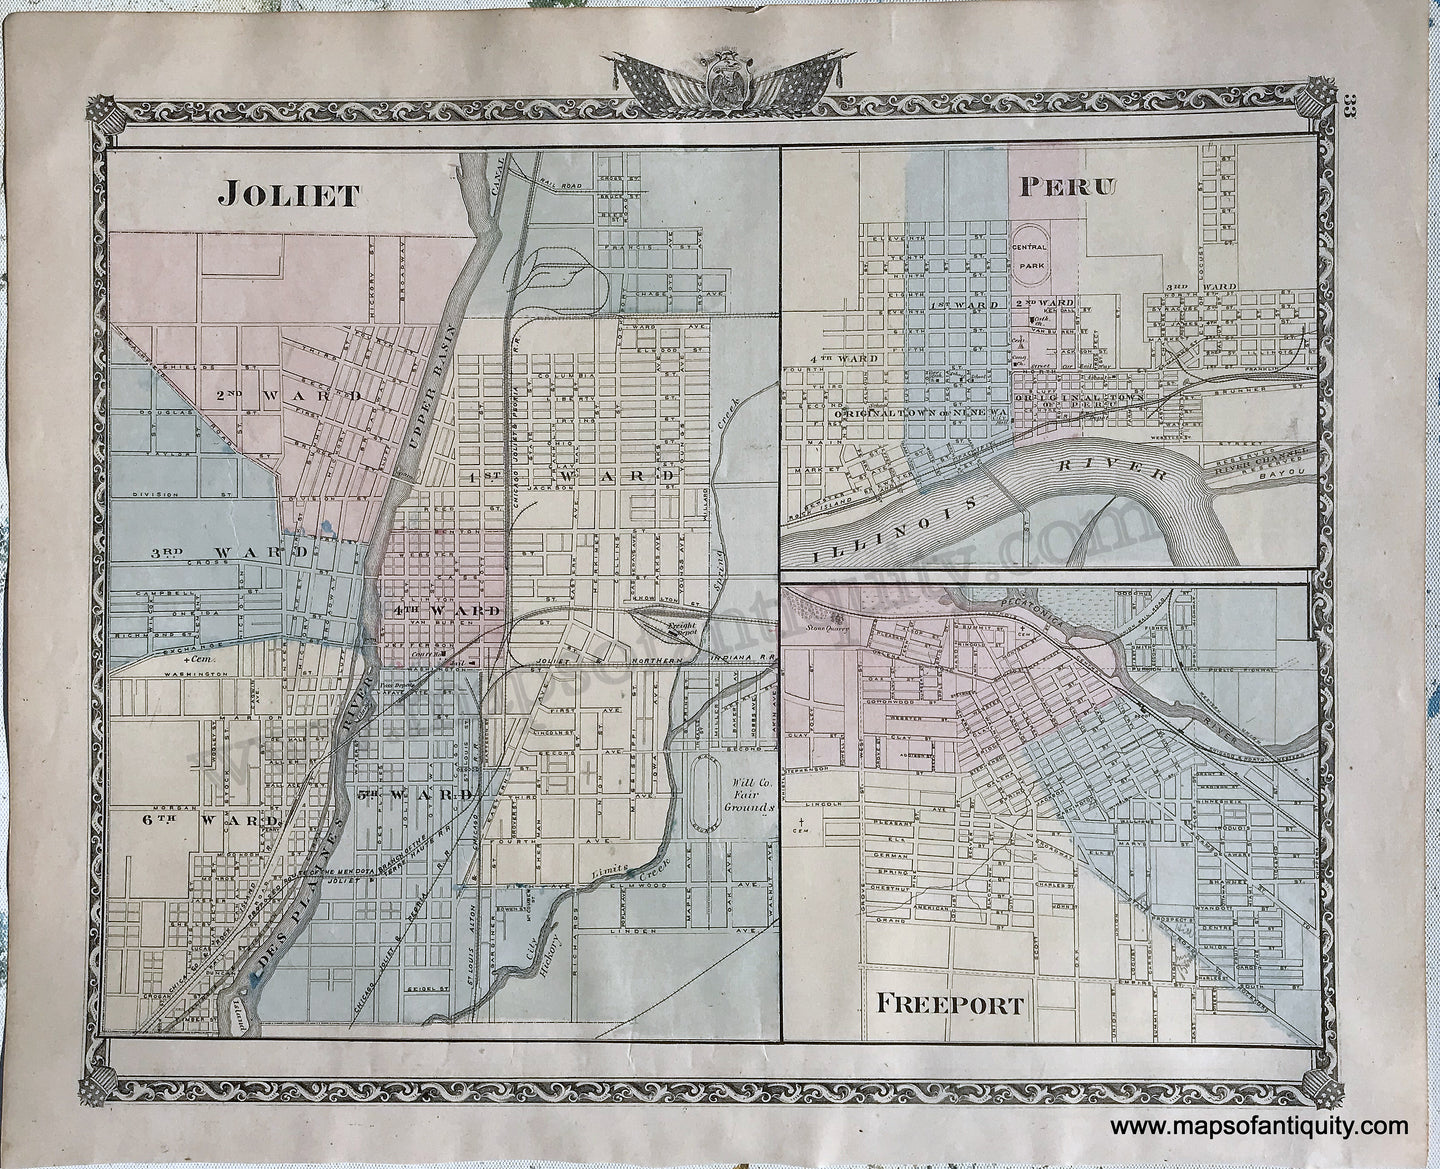 Antique-Hand-Colored-Map-Joliet-Peru-and-Freeport-Illinois;-verso:-Generelo-Cambridge-Fulton-Kewanee-and-Morrison-Illinois--1876-Warner-&-Beers-/-Union-Atlas-Co.-Midwest-1800s-19th-century-Maps-of-Antiquity